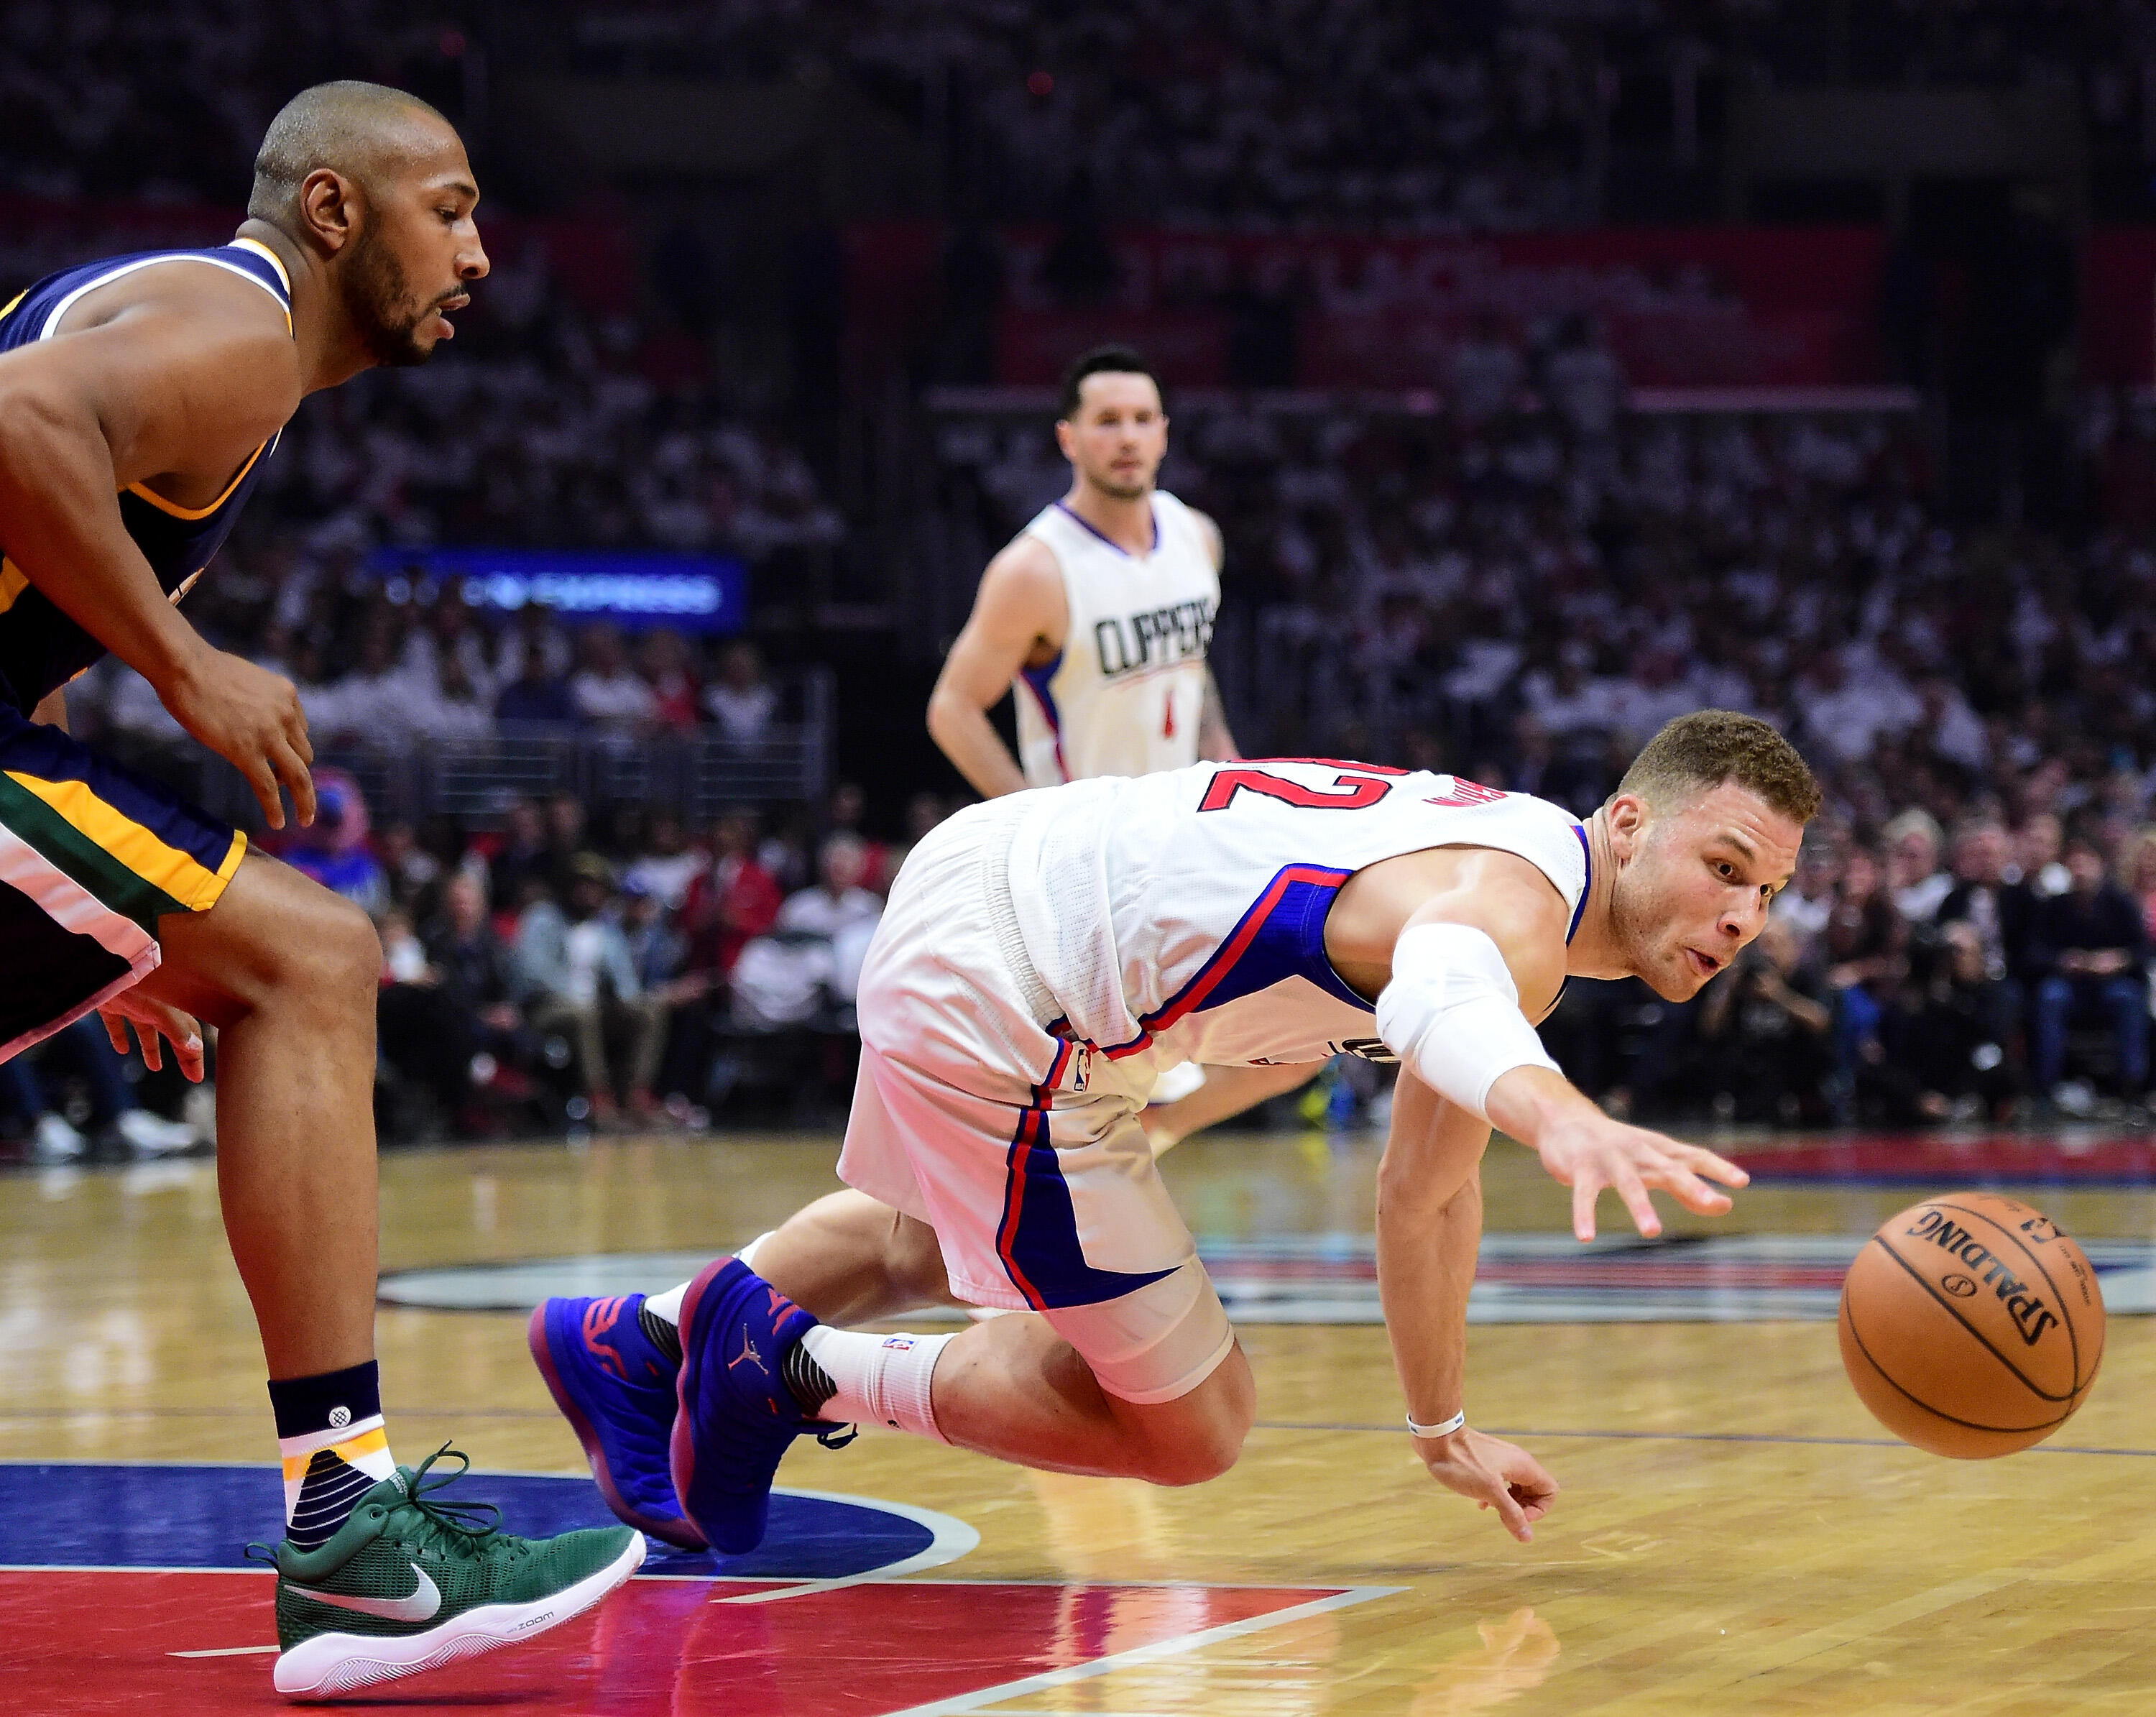 LOS ANGELES, CA - APRIL 15:  Blake Griffin #32 of the LA Clippers dives for a ball in front of Boris Diaw #33 of the Utah Jazz during the first half at Staples Center on April 15, 2017 in Los Angeles, California.  NOTE TO USER: User expressly acknowledges